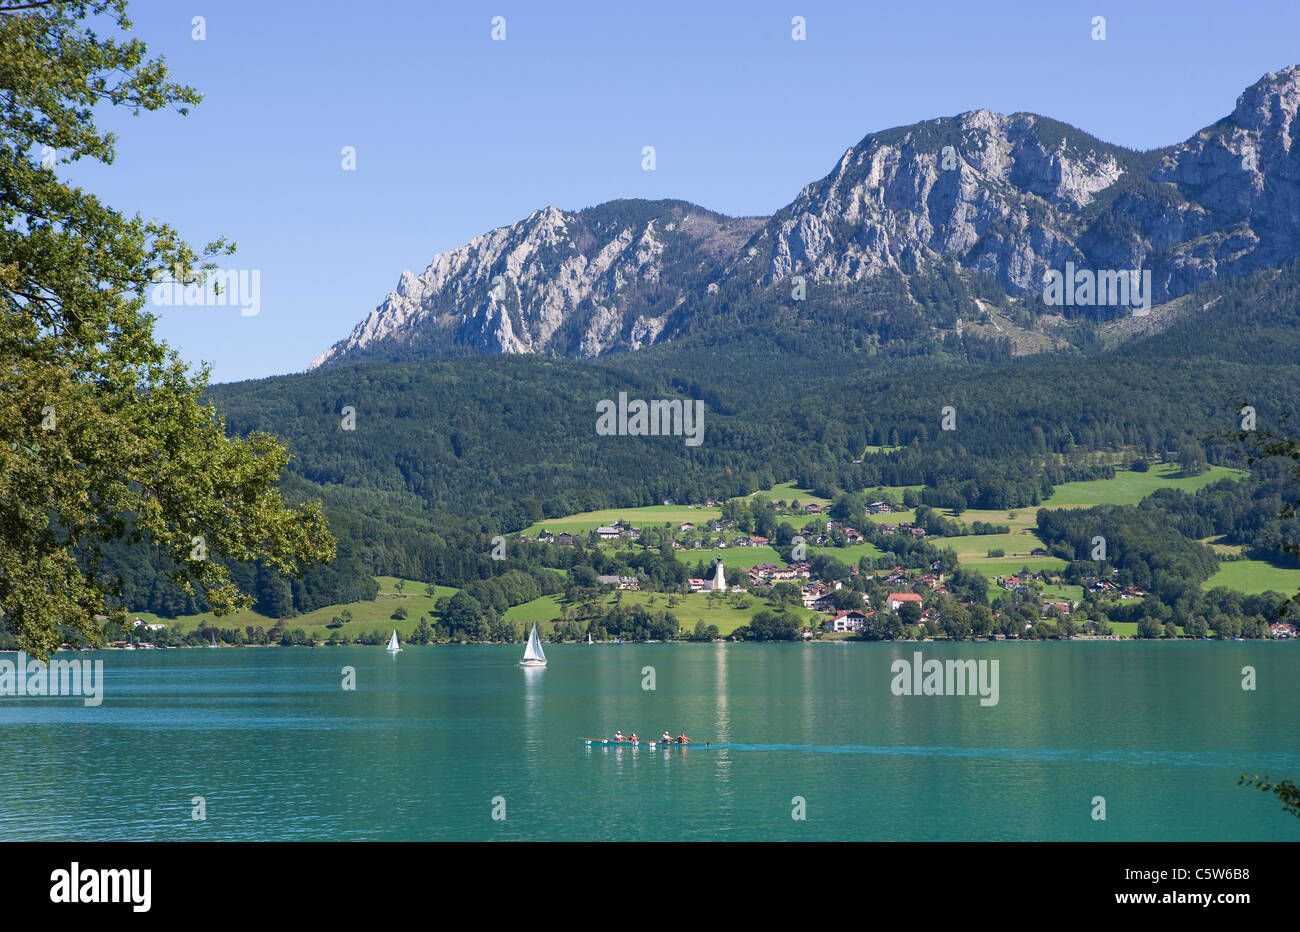 Austria, Salzkammergut, View of steinbach am attersee and attersee lake with hoellen mountains in background Stock Photo